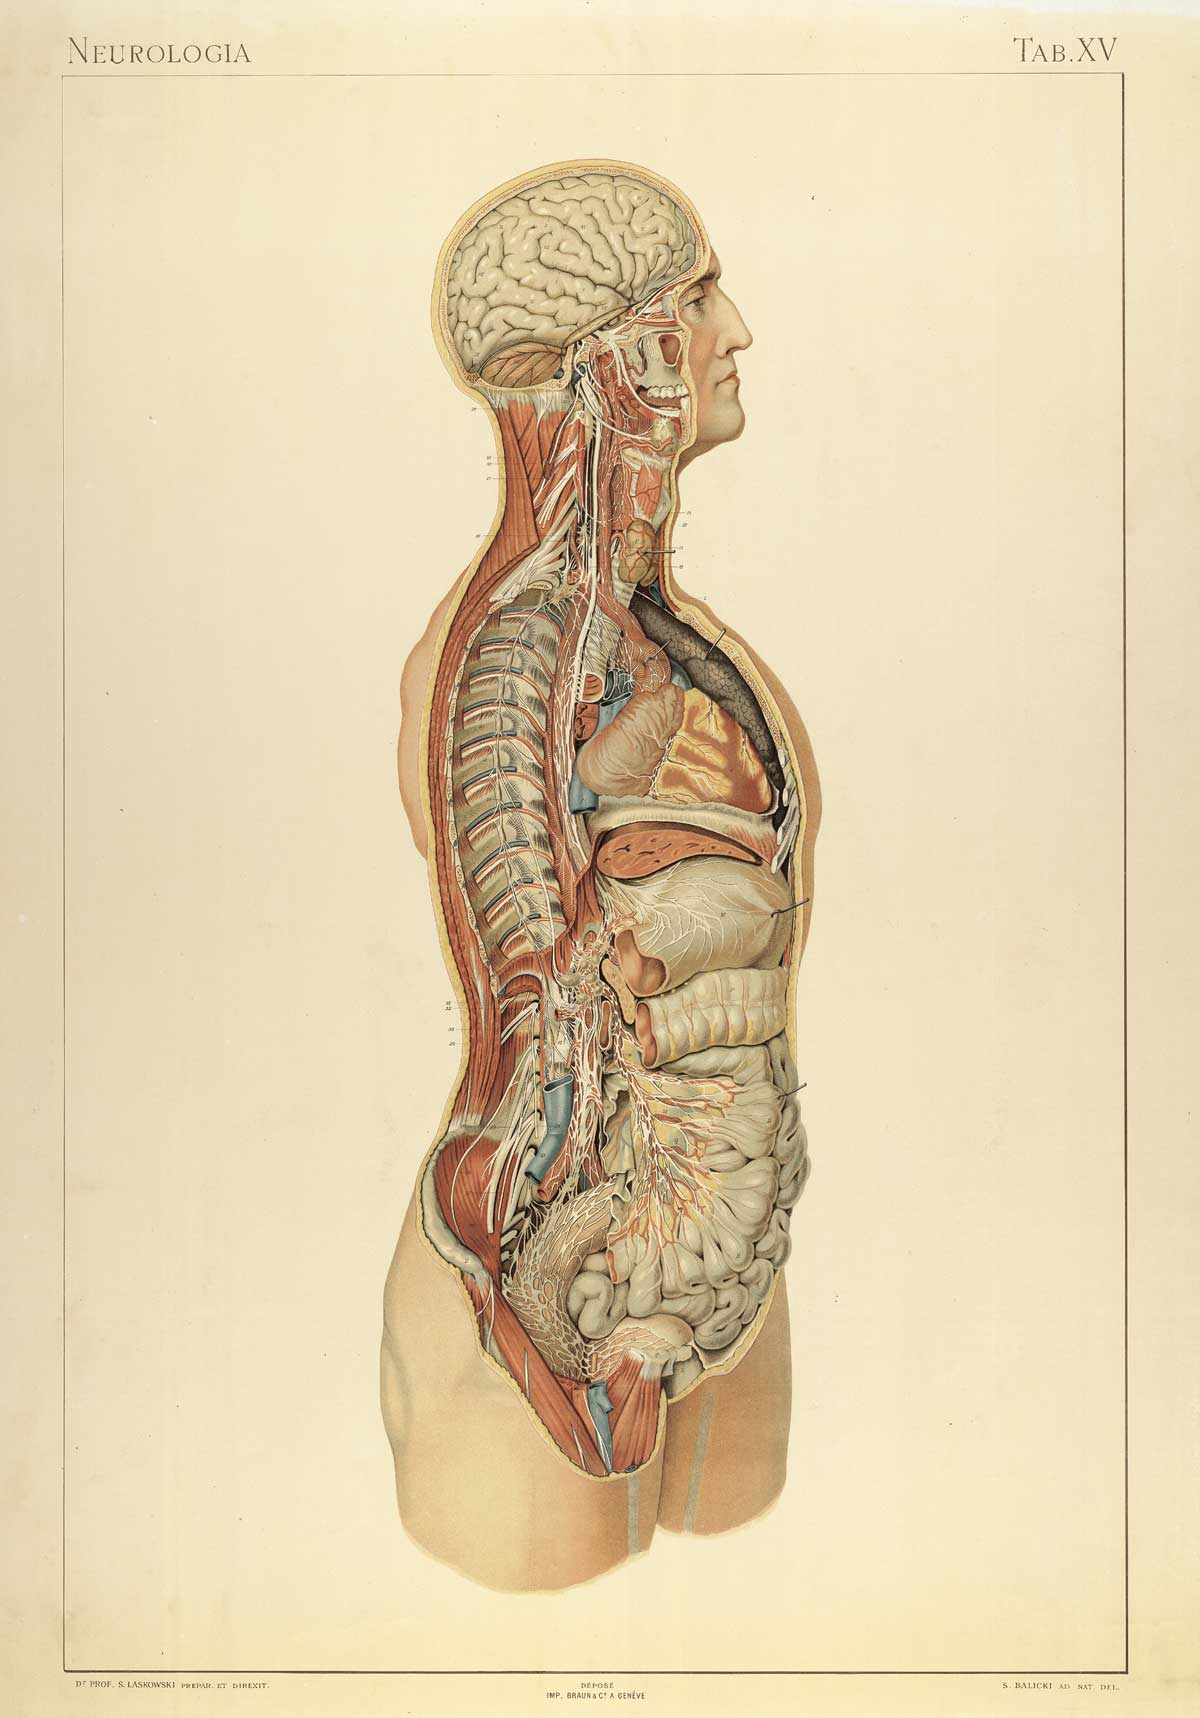 Plate 15 of Sigismond Laskowski's Anatomie normale du corps humain, featuring the side view of a male figure that has been cut vertically to show the interior nerves of the body.